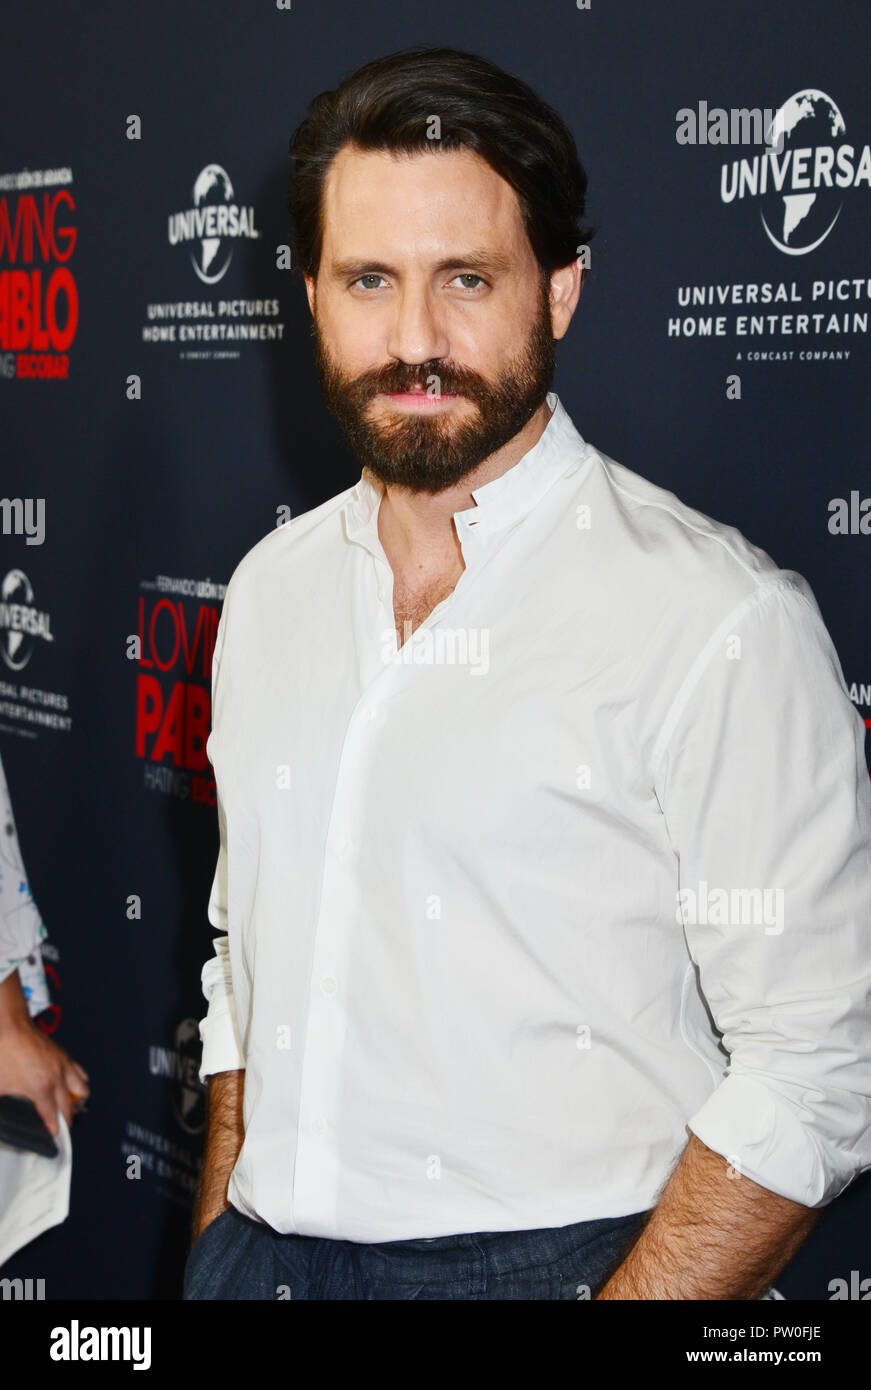 Edgar Ramirez 031 arrives at the Universal Pictures Home Entertainment Content Group's 'Loving Pablo' Special Screening at The London West Hollywood on September 16, 2018 in West Hollywood, California. Stock Photo